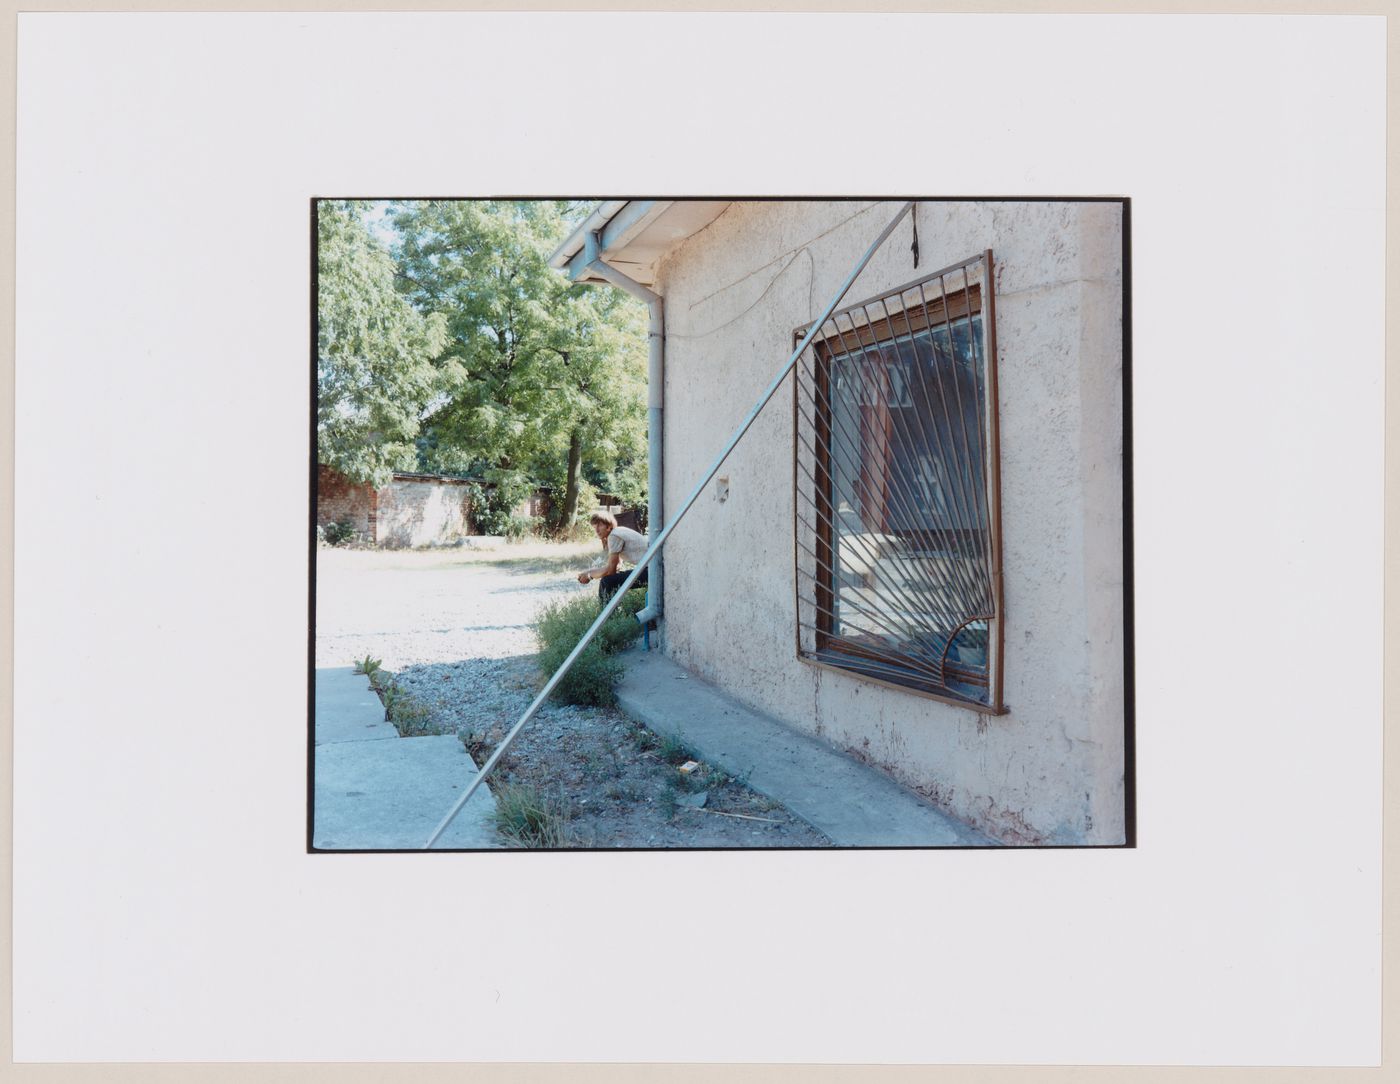 Portrait of a man and a house showing a window with a grille, Ladushkin, Kaliningradskaia oblast', Russia (from the series "In between cities")